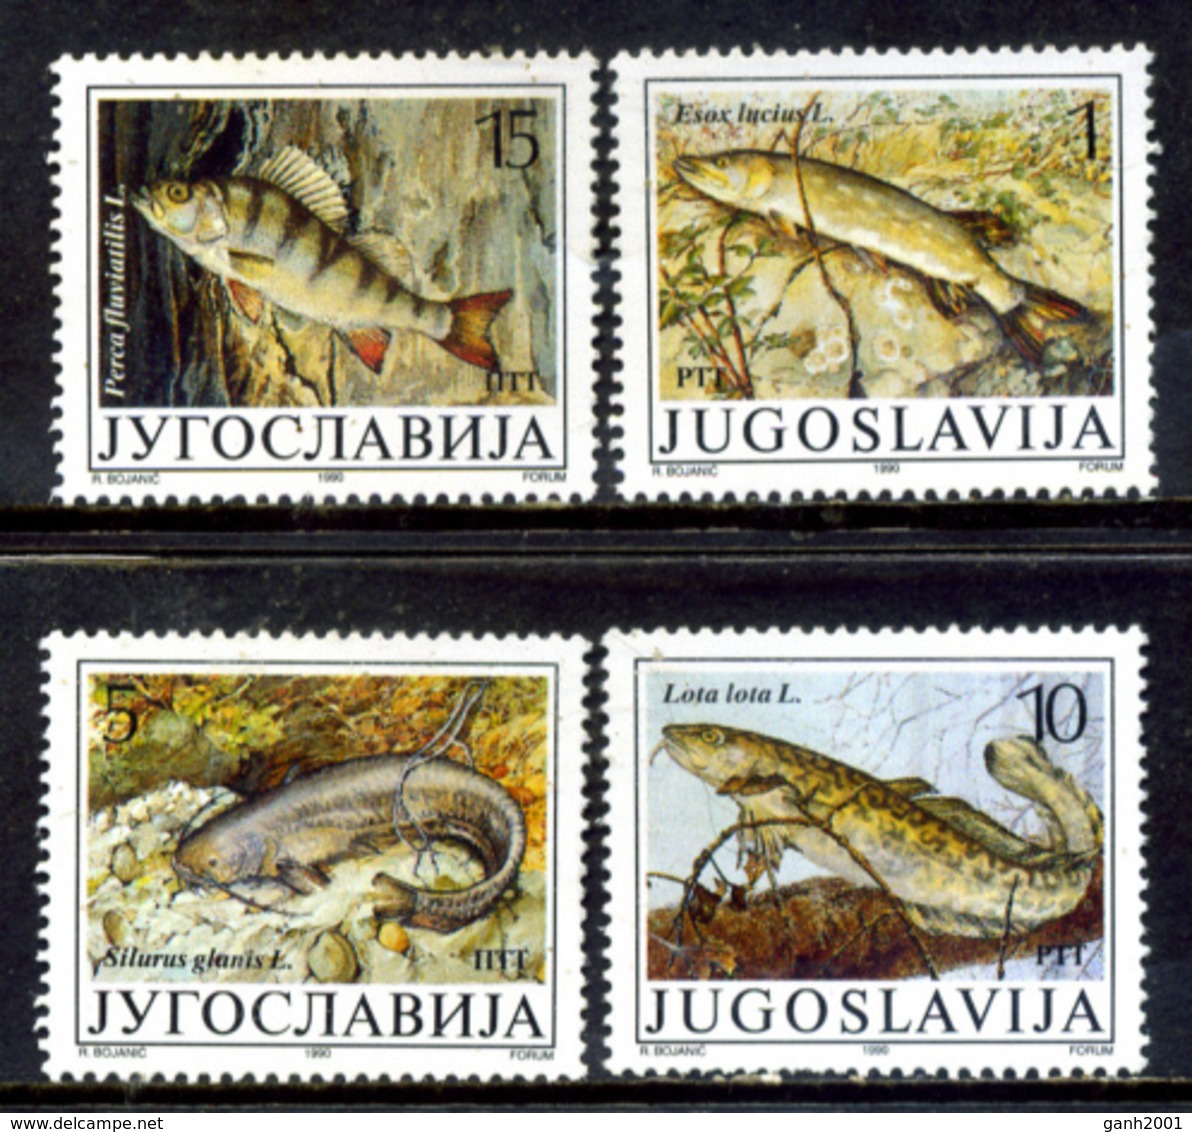 Yugoslavia 1990 / Fish Fishes MNH Peces Fische Poisson / Hg61  38-29 - Fishes